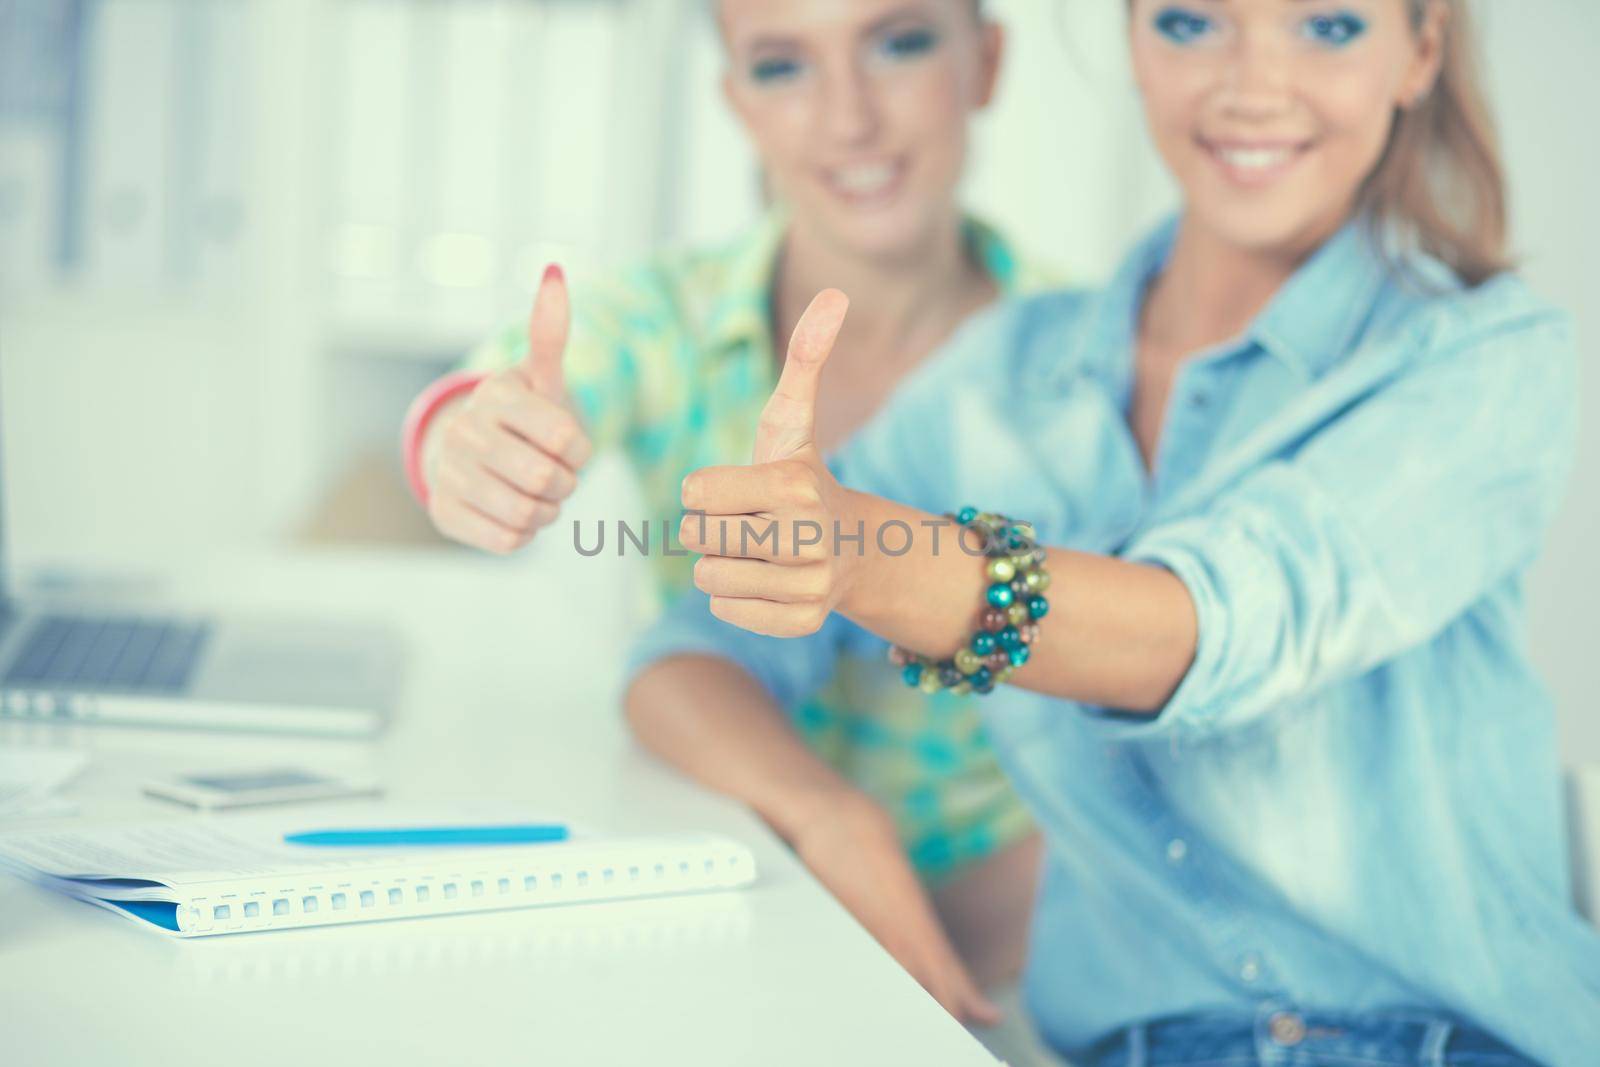 Two women working together at office, sitting on the desk.